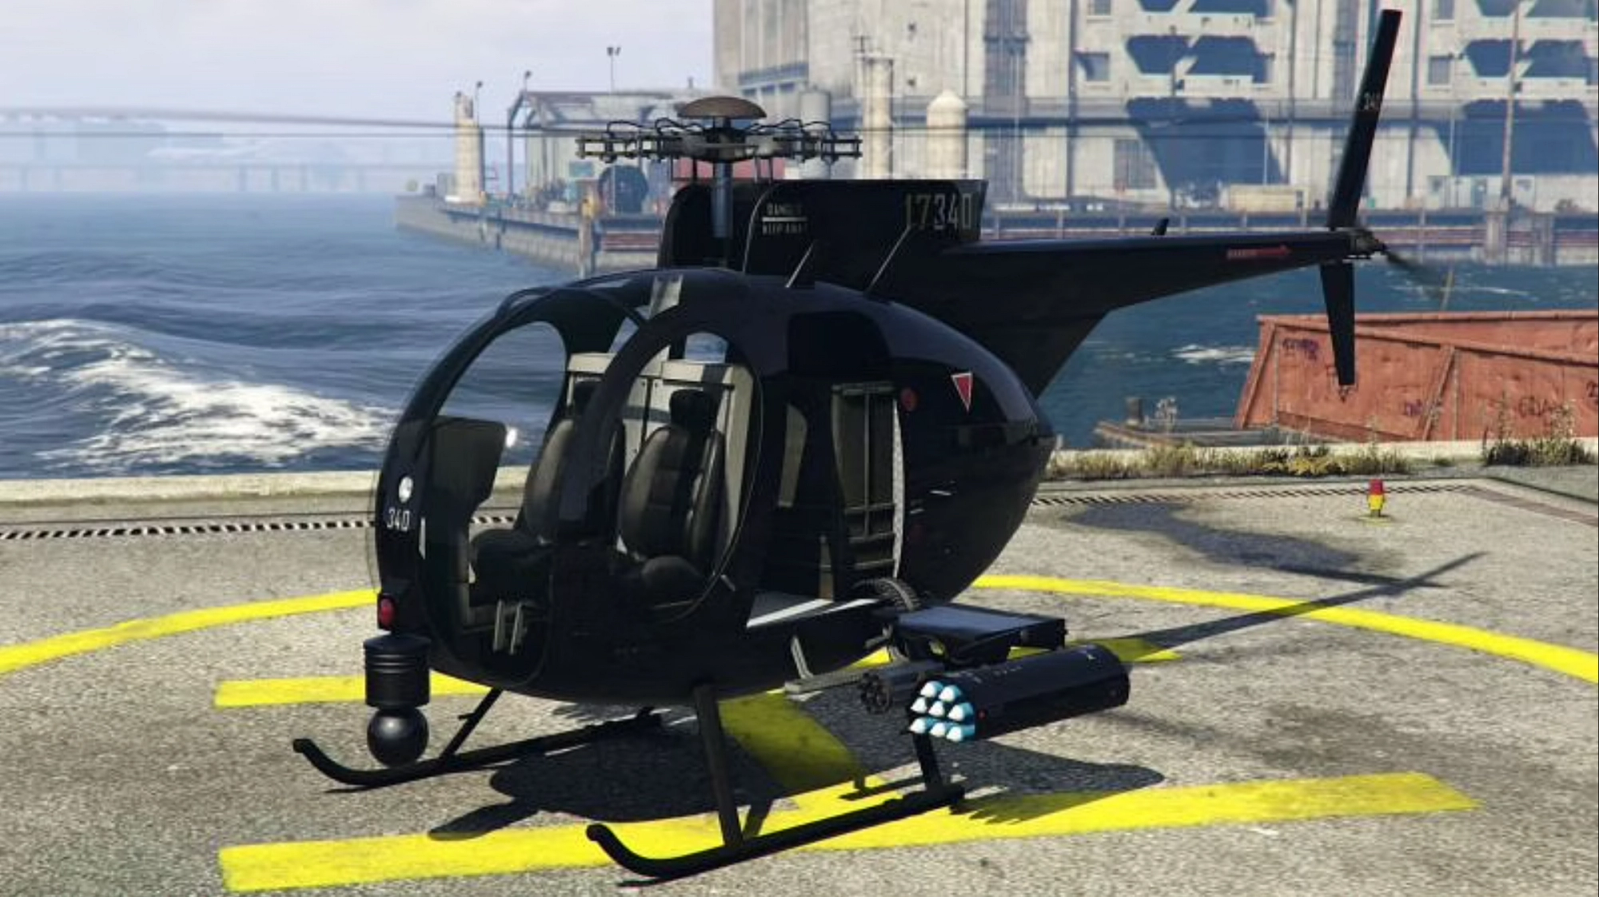 An image of a helicopter in GTA 5